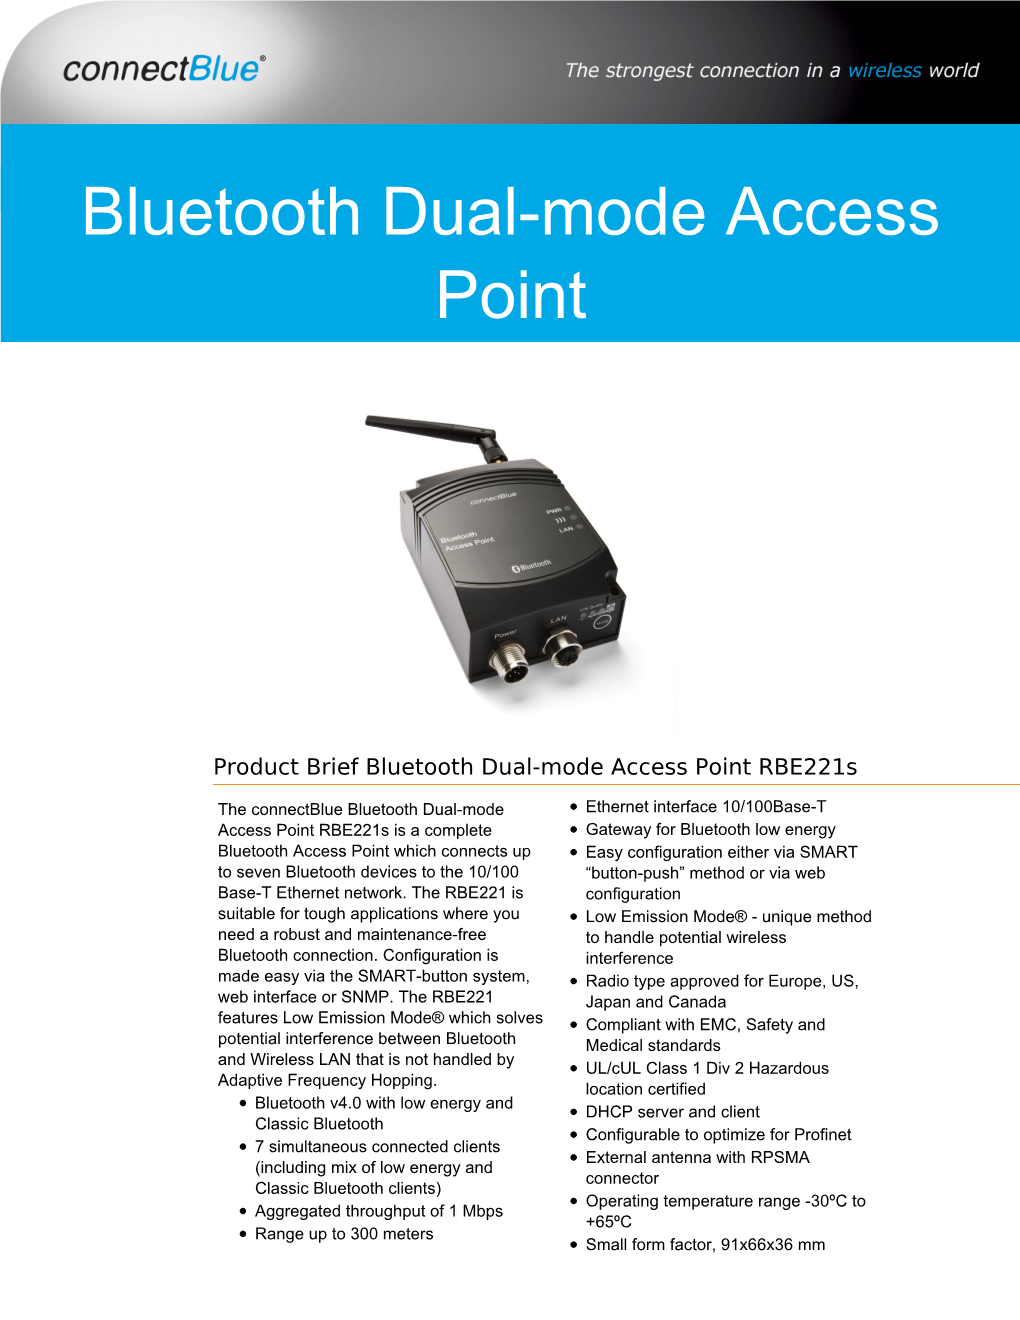 Bluetooth Dual-Mode Access Point